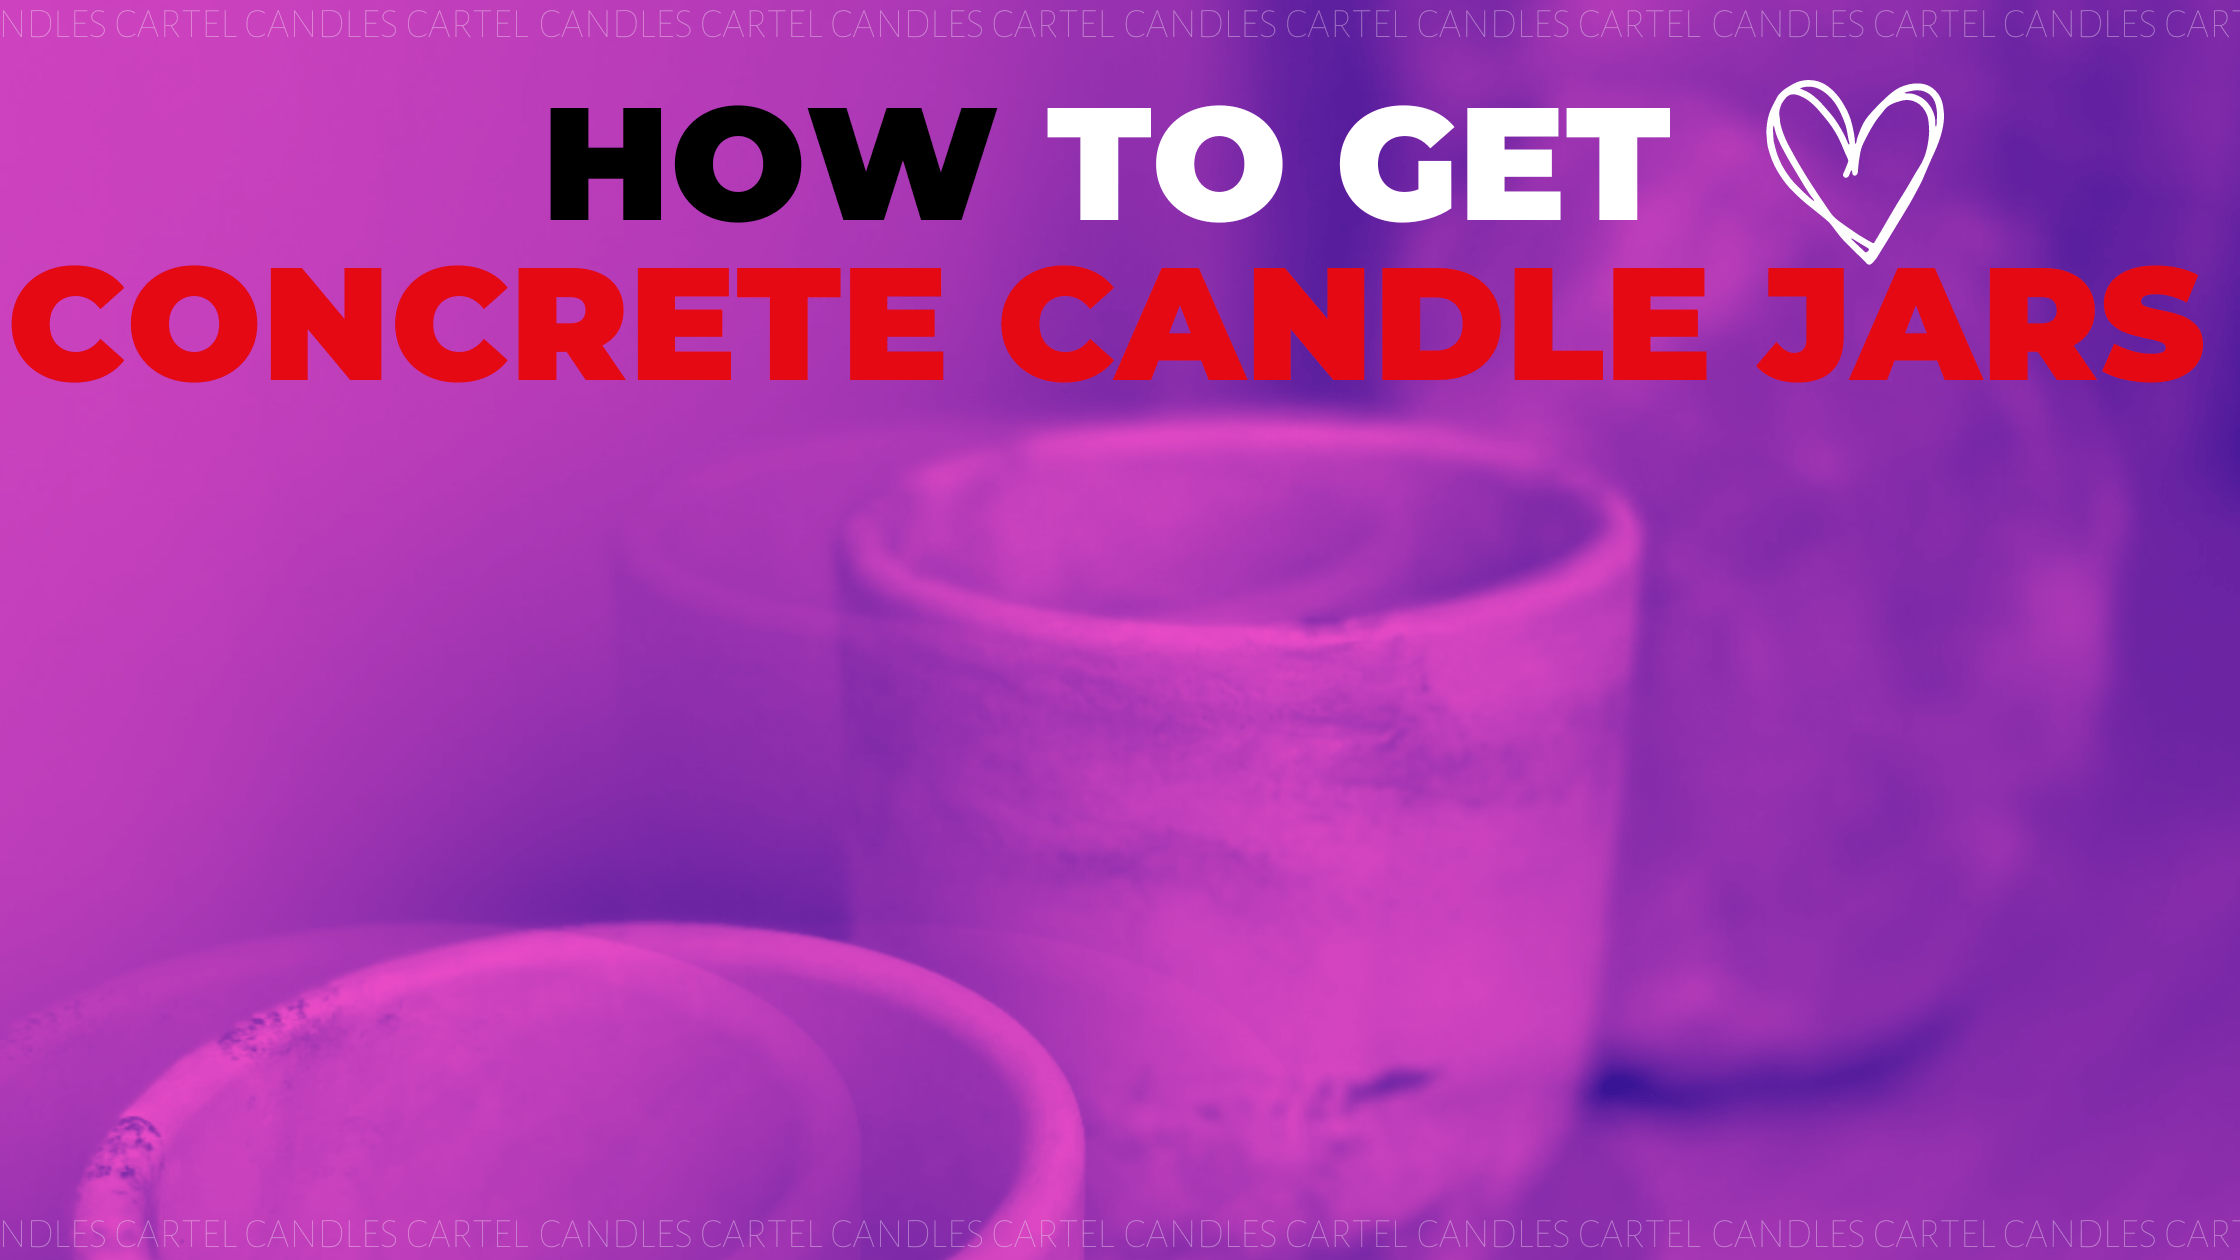 How To Get Concrete Candle Jars  - Blog Article